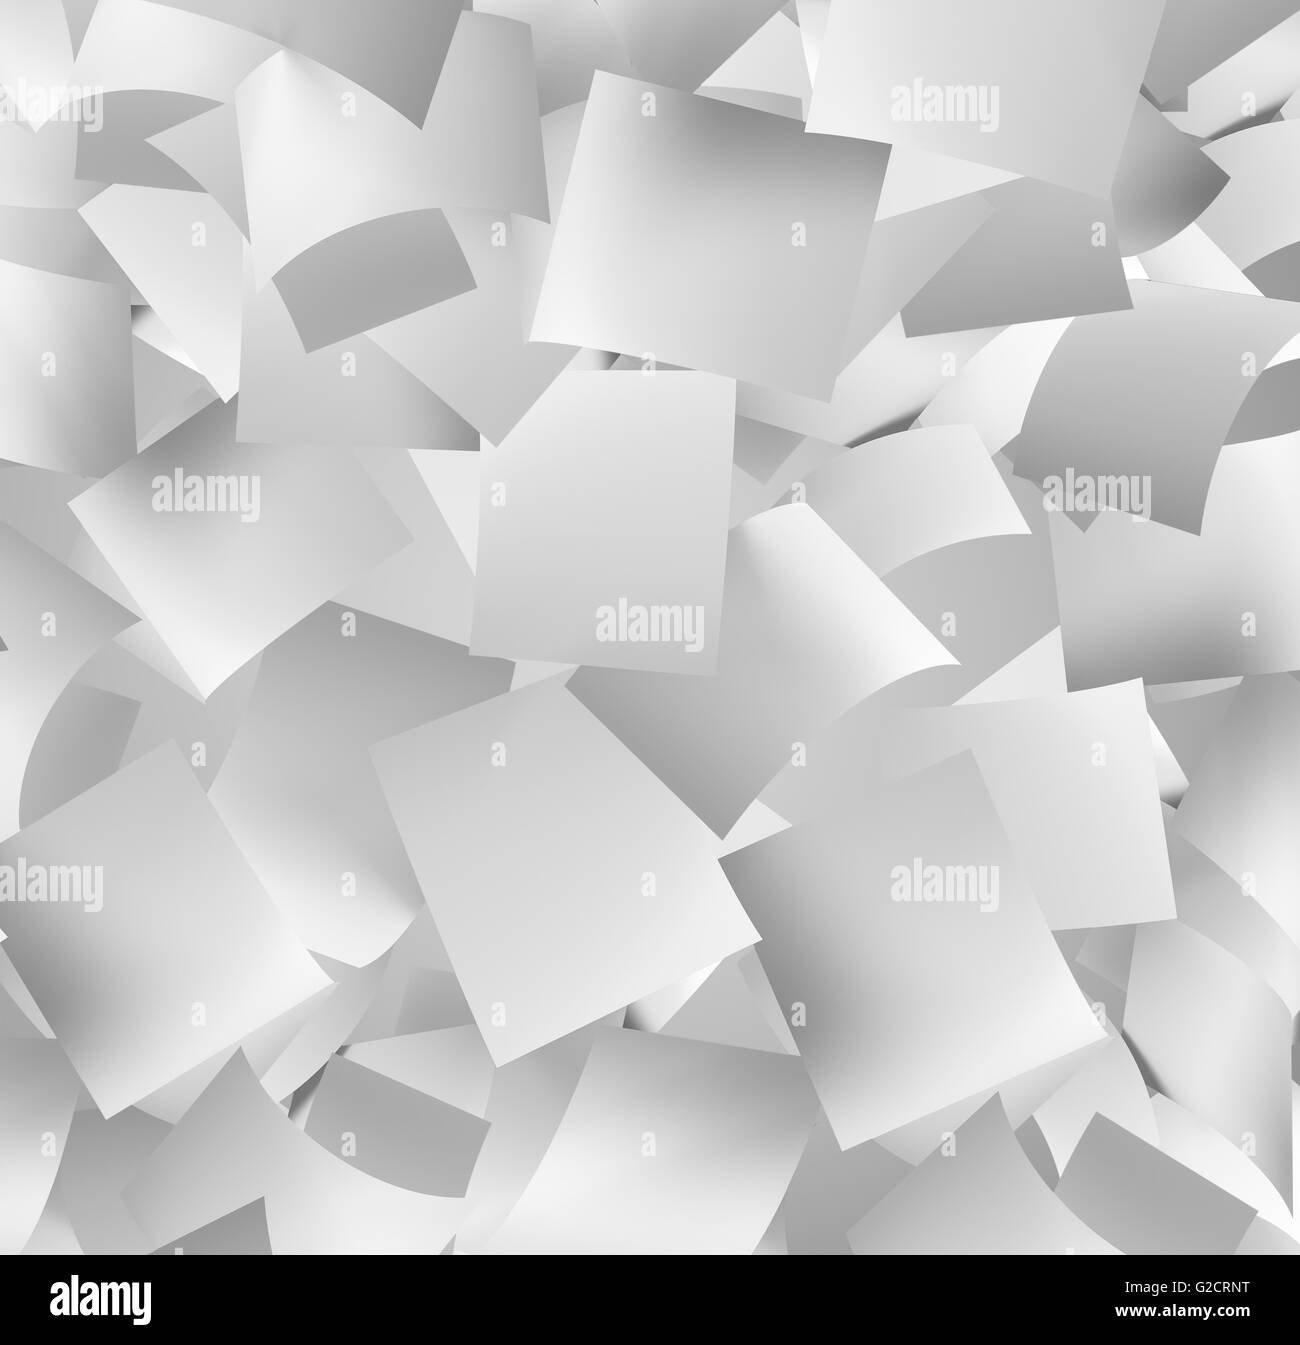 front view of a large amount of white empty papers falling down Stock Photo